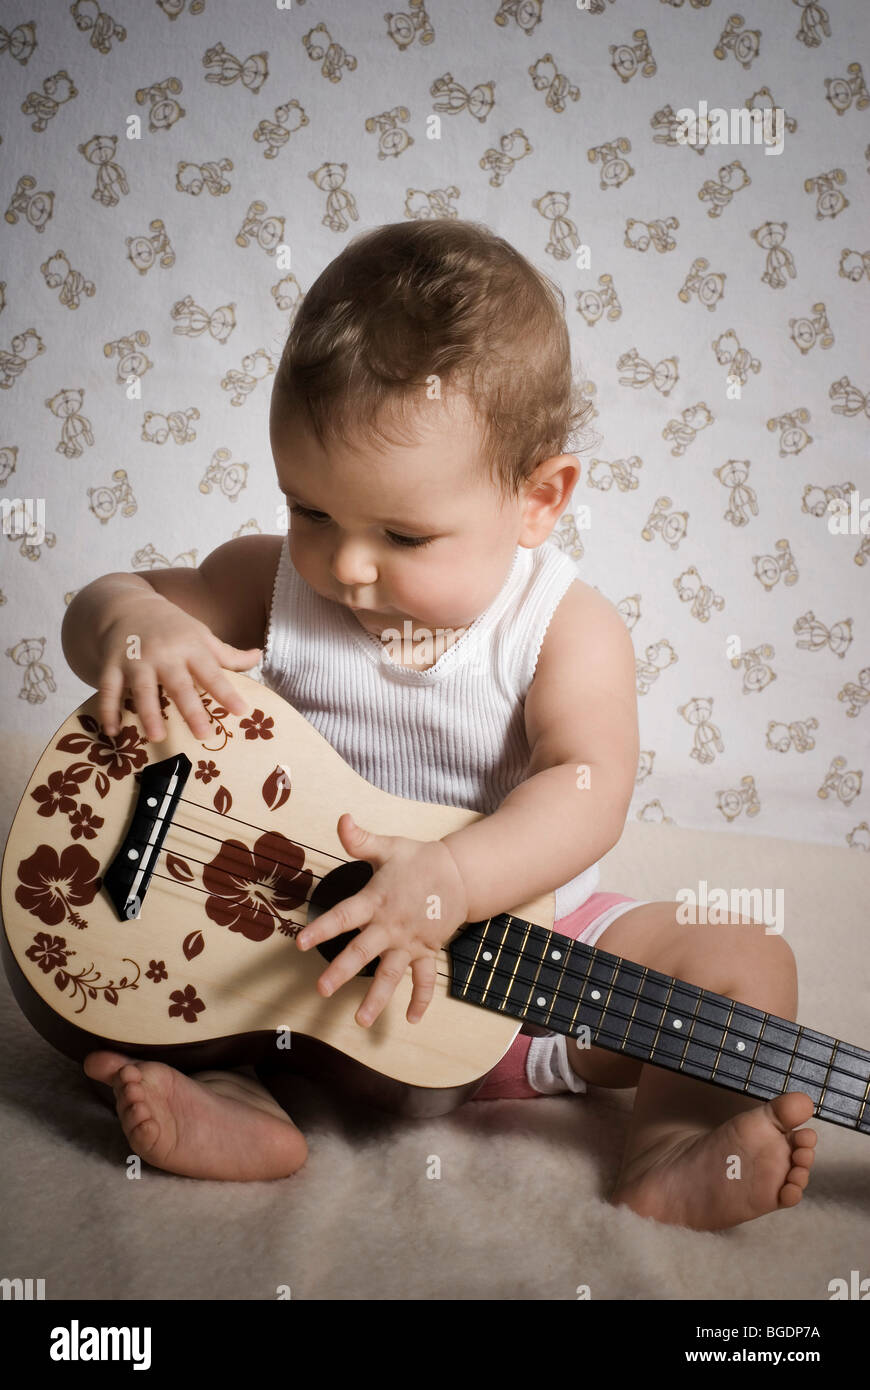 Baby with guitar Stock Photo